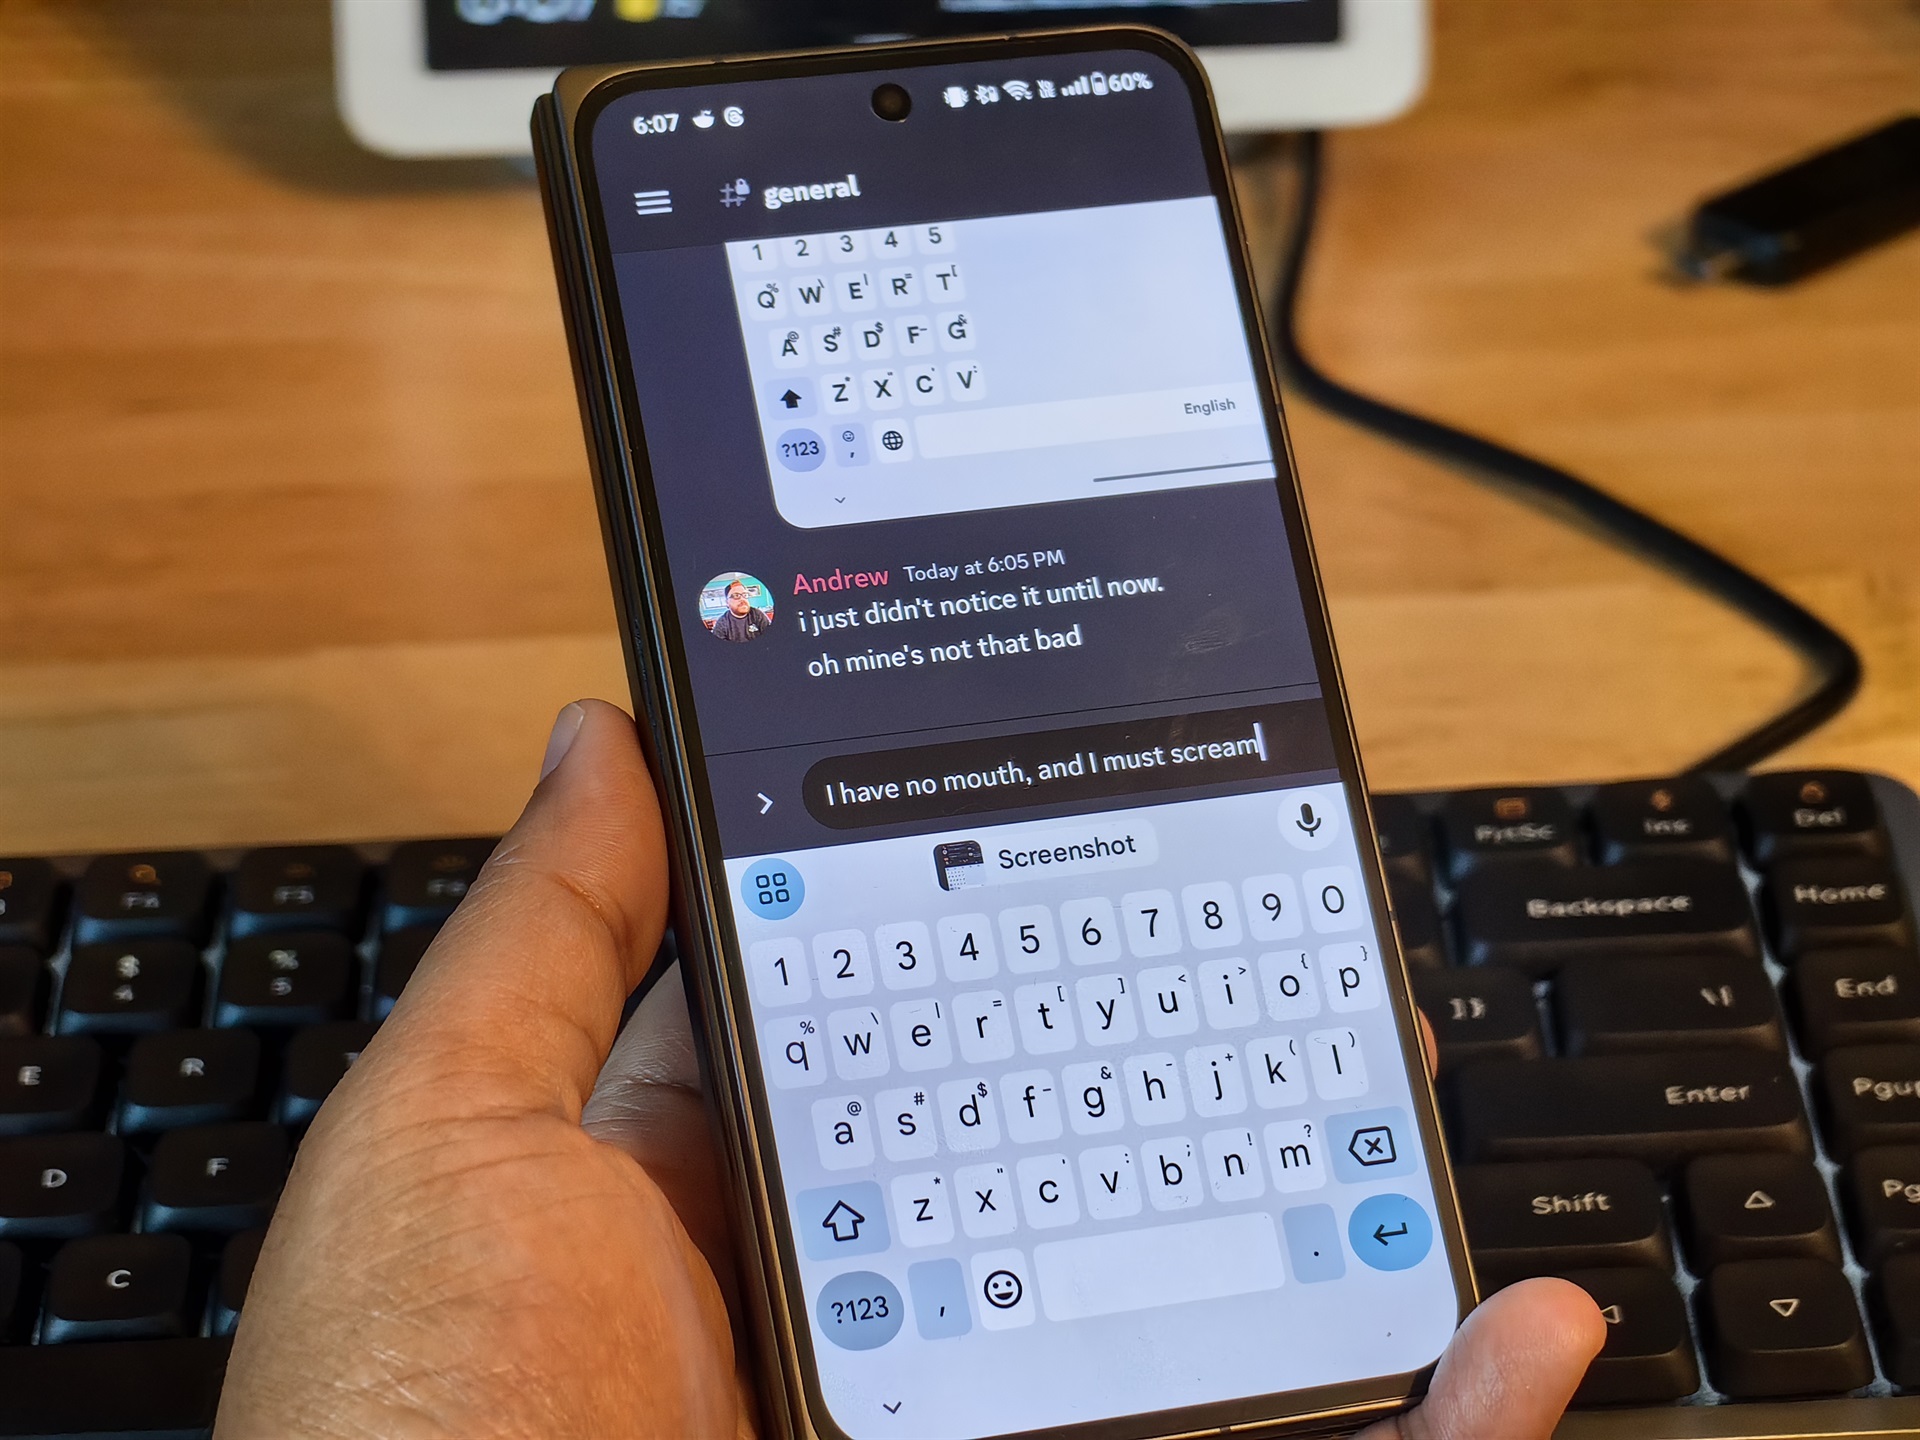 Using Discord on the OnePlus Open external screen